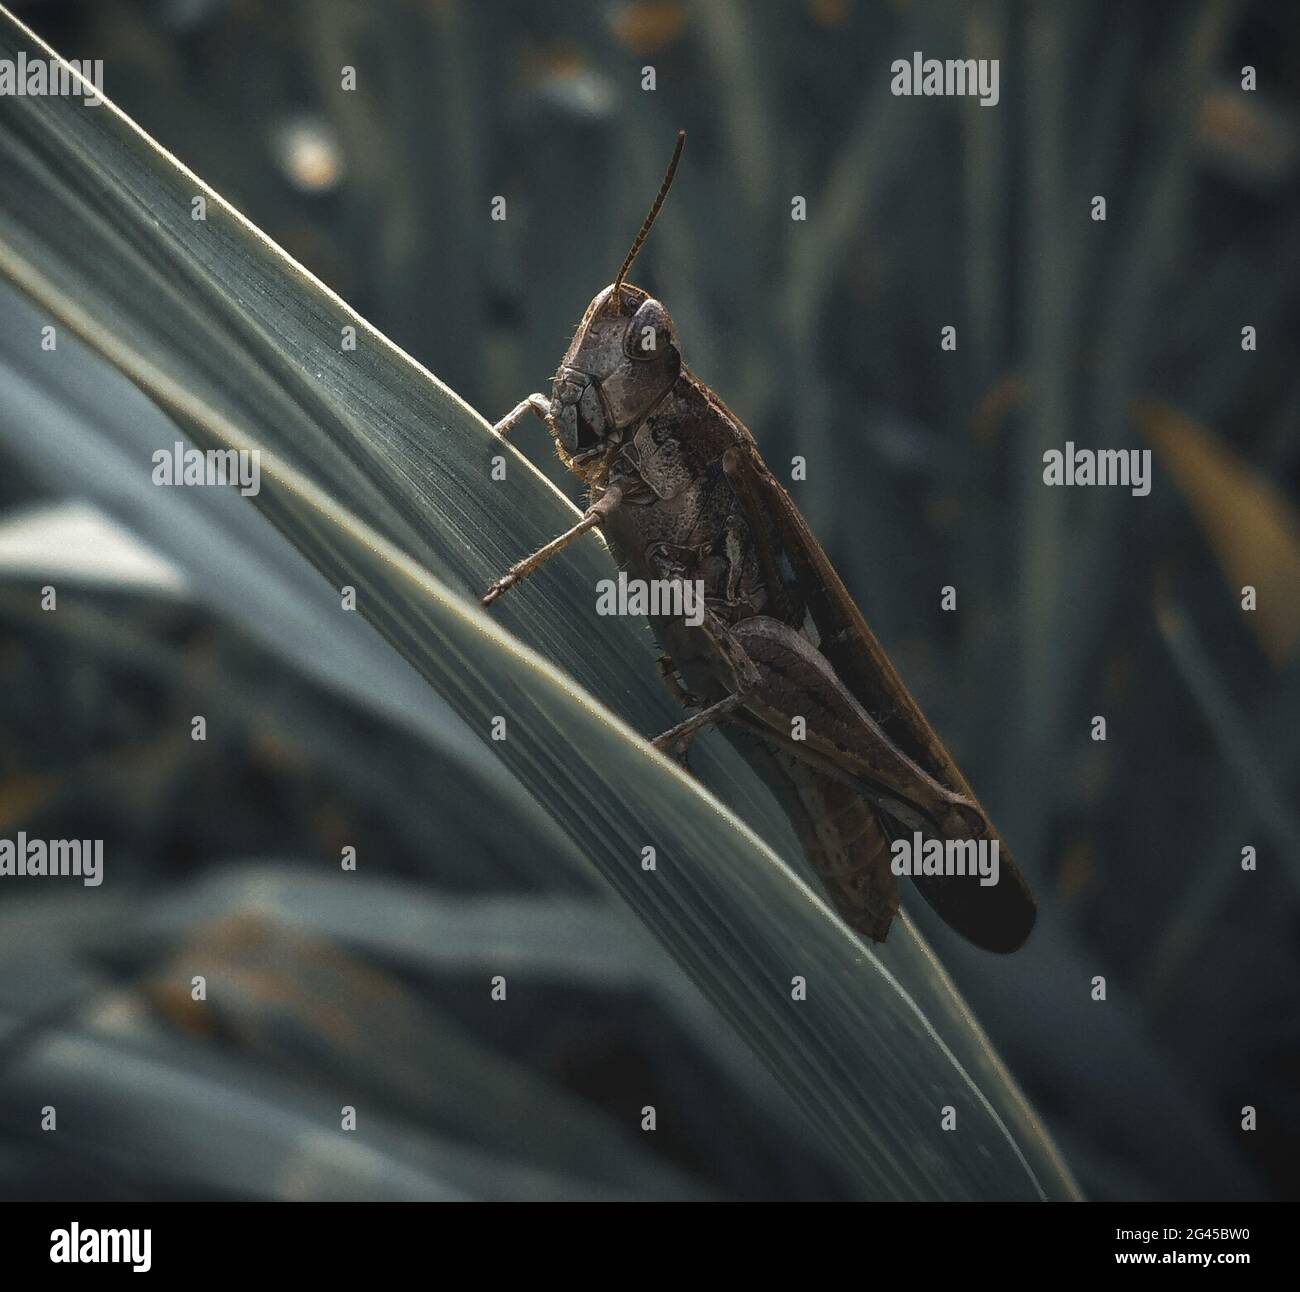 A grasshopper image with a leaf. Stock Photo